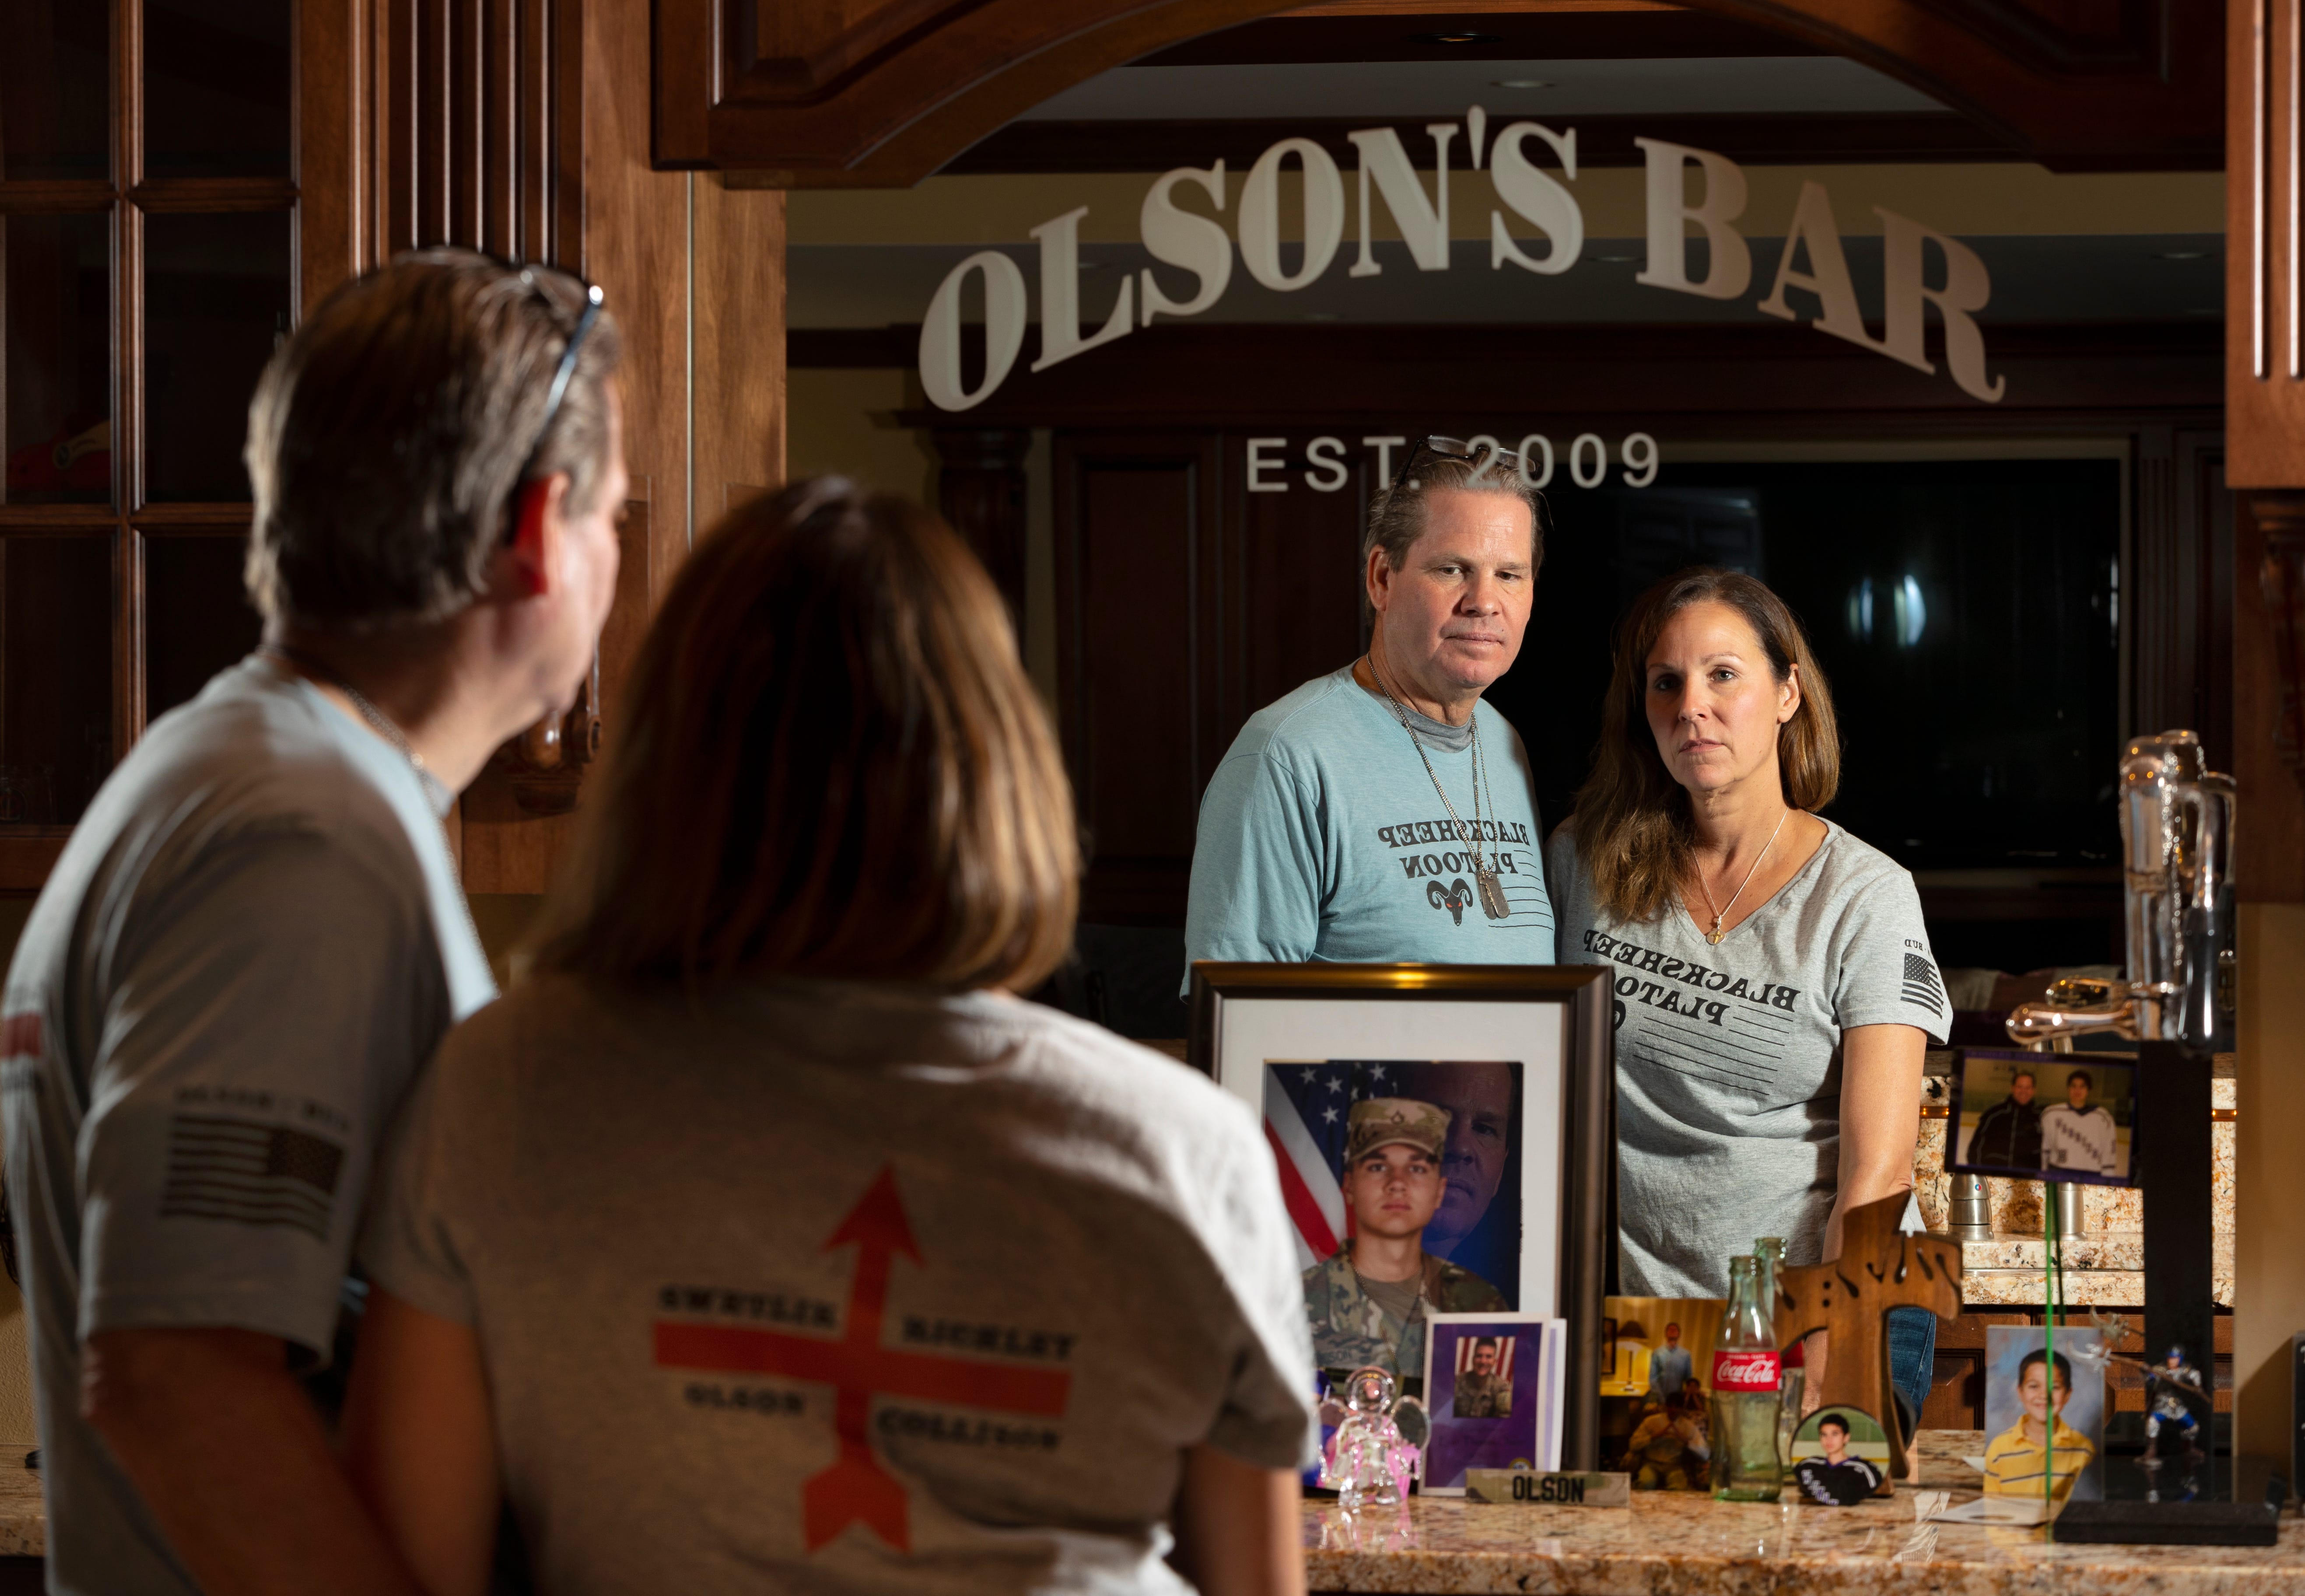 Eric and Juli Olson are shown with a memorial to their son, Evan, at their home in Waunakee, Wisconsin. Their son, Evan, who was a member of the Wisconsin National Guard, committed suicide in December 2020.